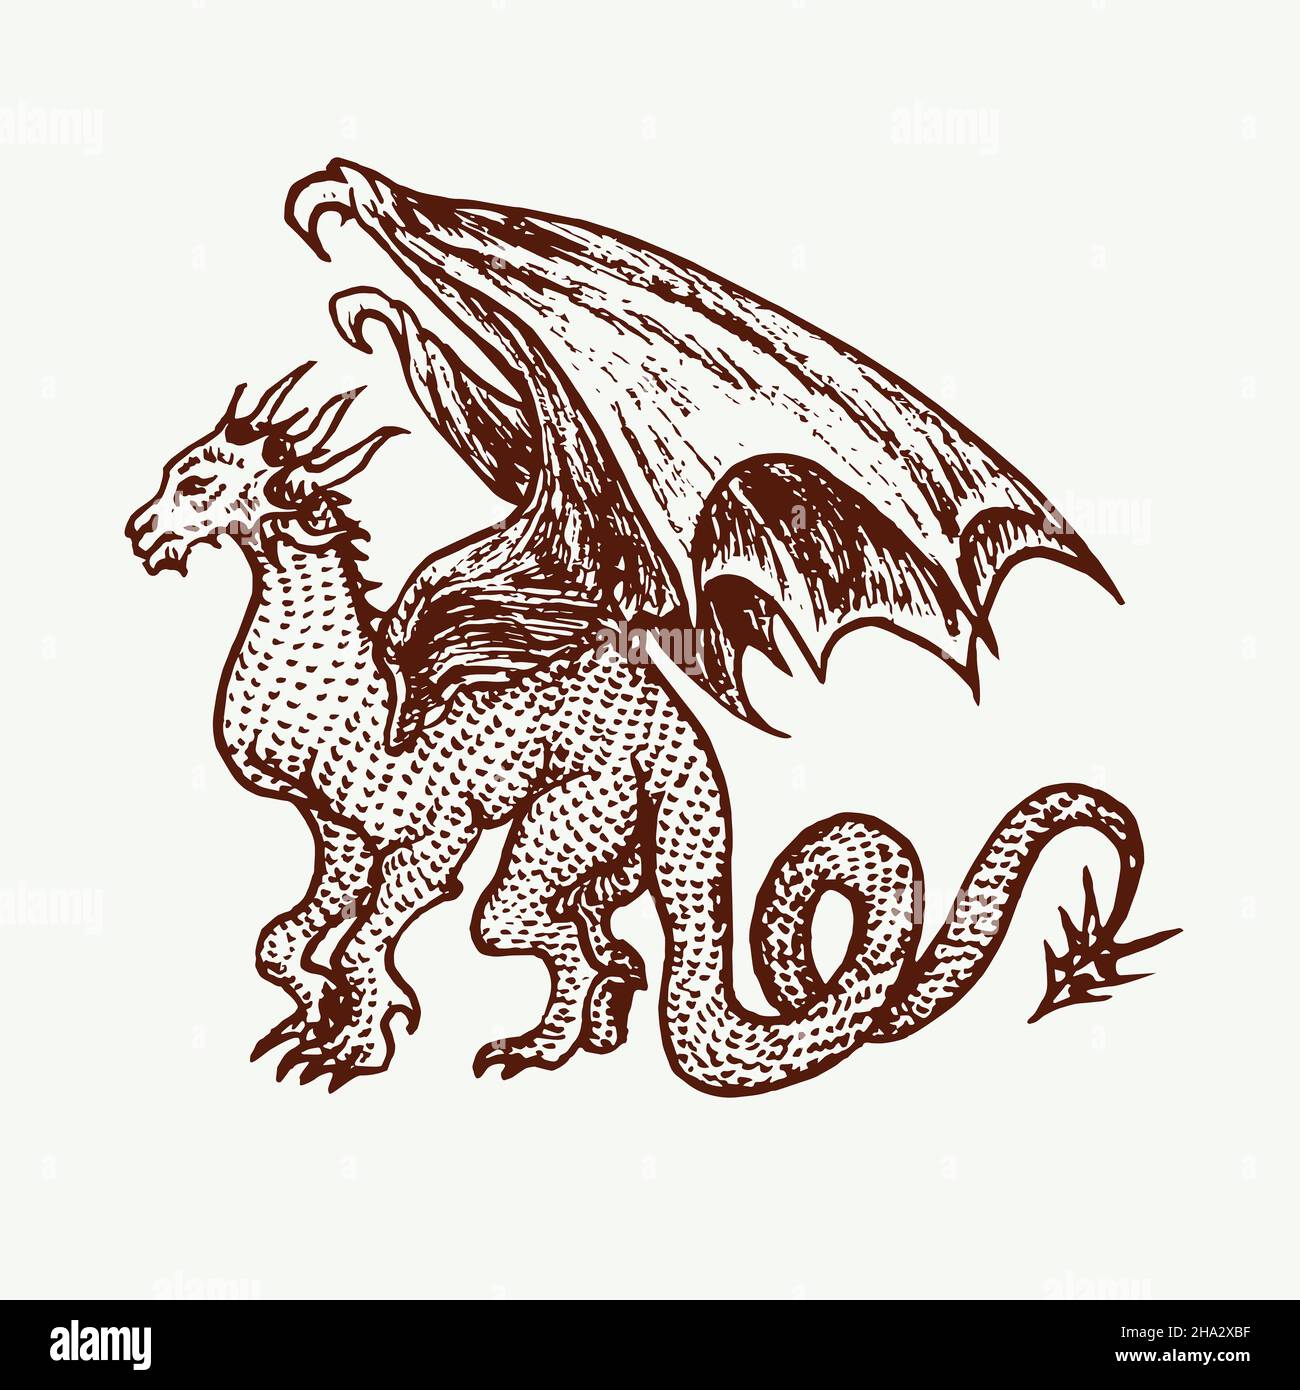 Dragon standing side view, large wings and long sharp tail, hand drawn doodle sketch, ink drawing illustration Stock Photo